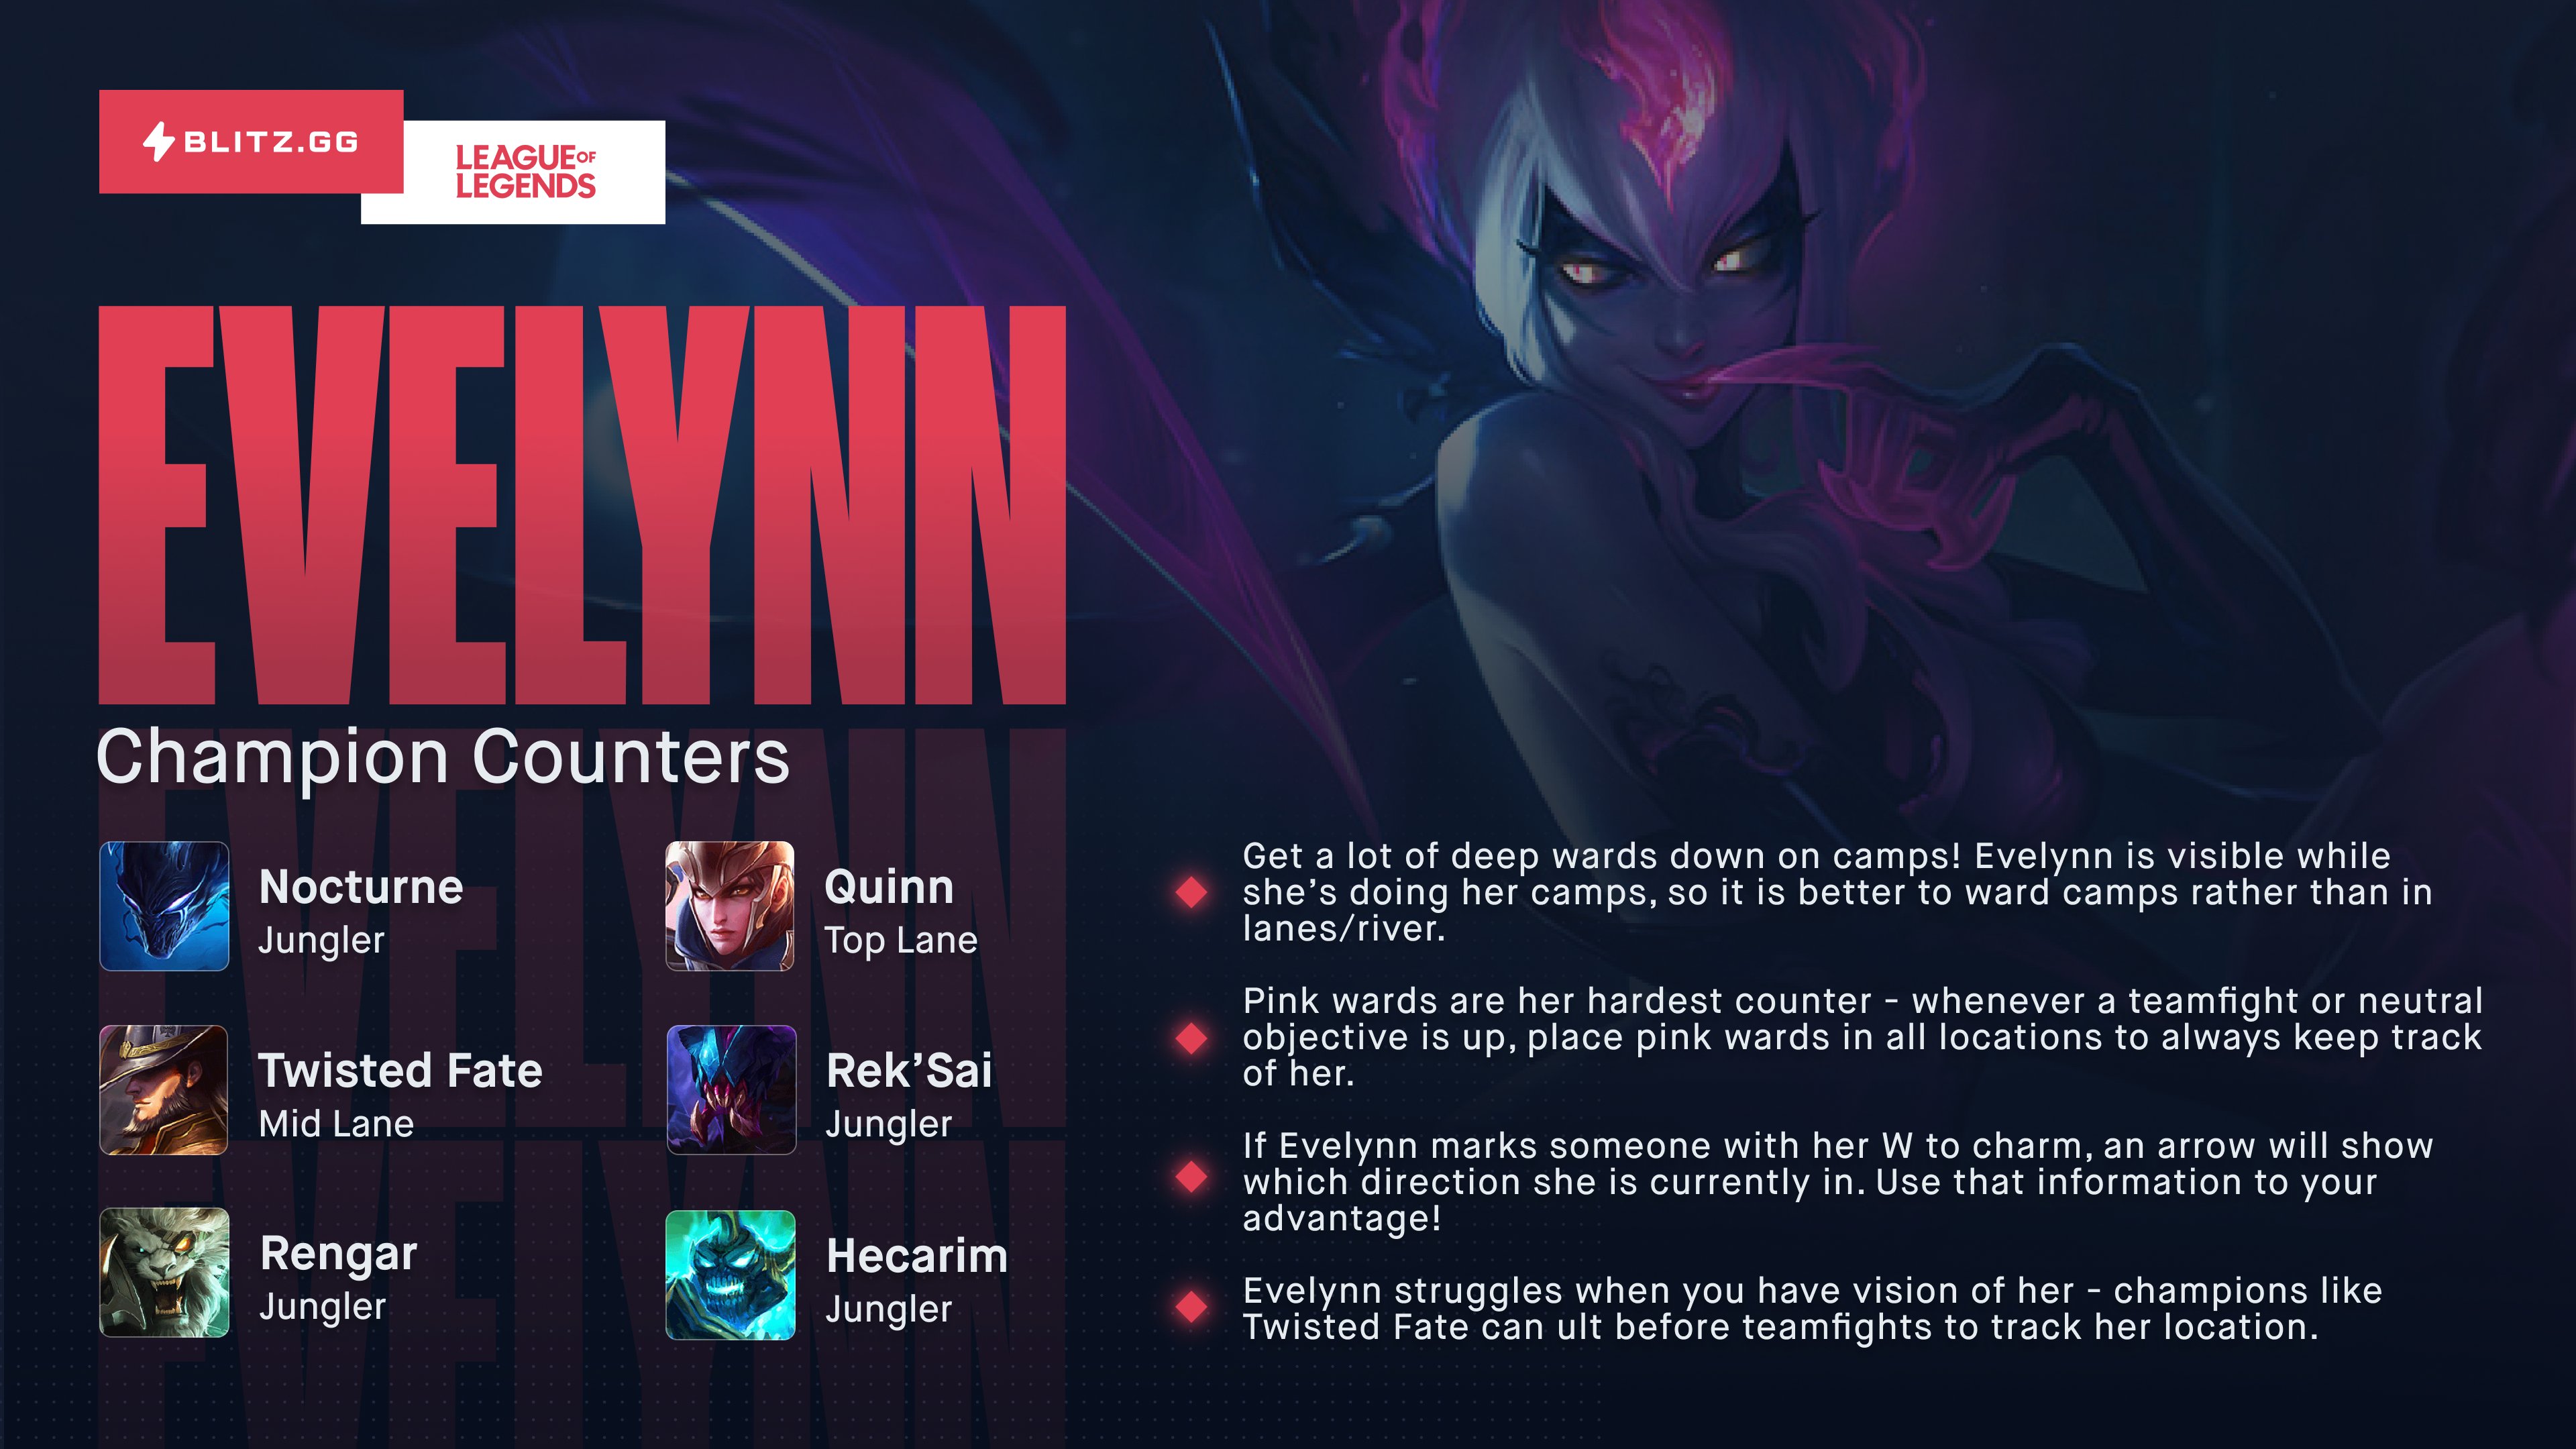 Dolke faktor bølge Blitz App Twitterissä: "Evelynn's biggest asset is that she can go  invisible. So how do you counter someone you can't see? Here's how to play  against her ⤵️ https://t.co/RRUvsBD5qn" / Twitter